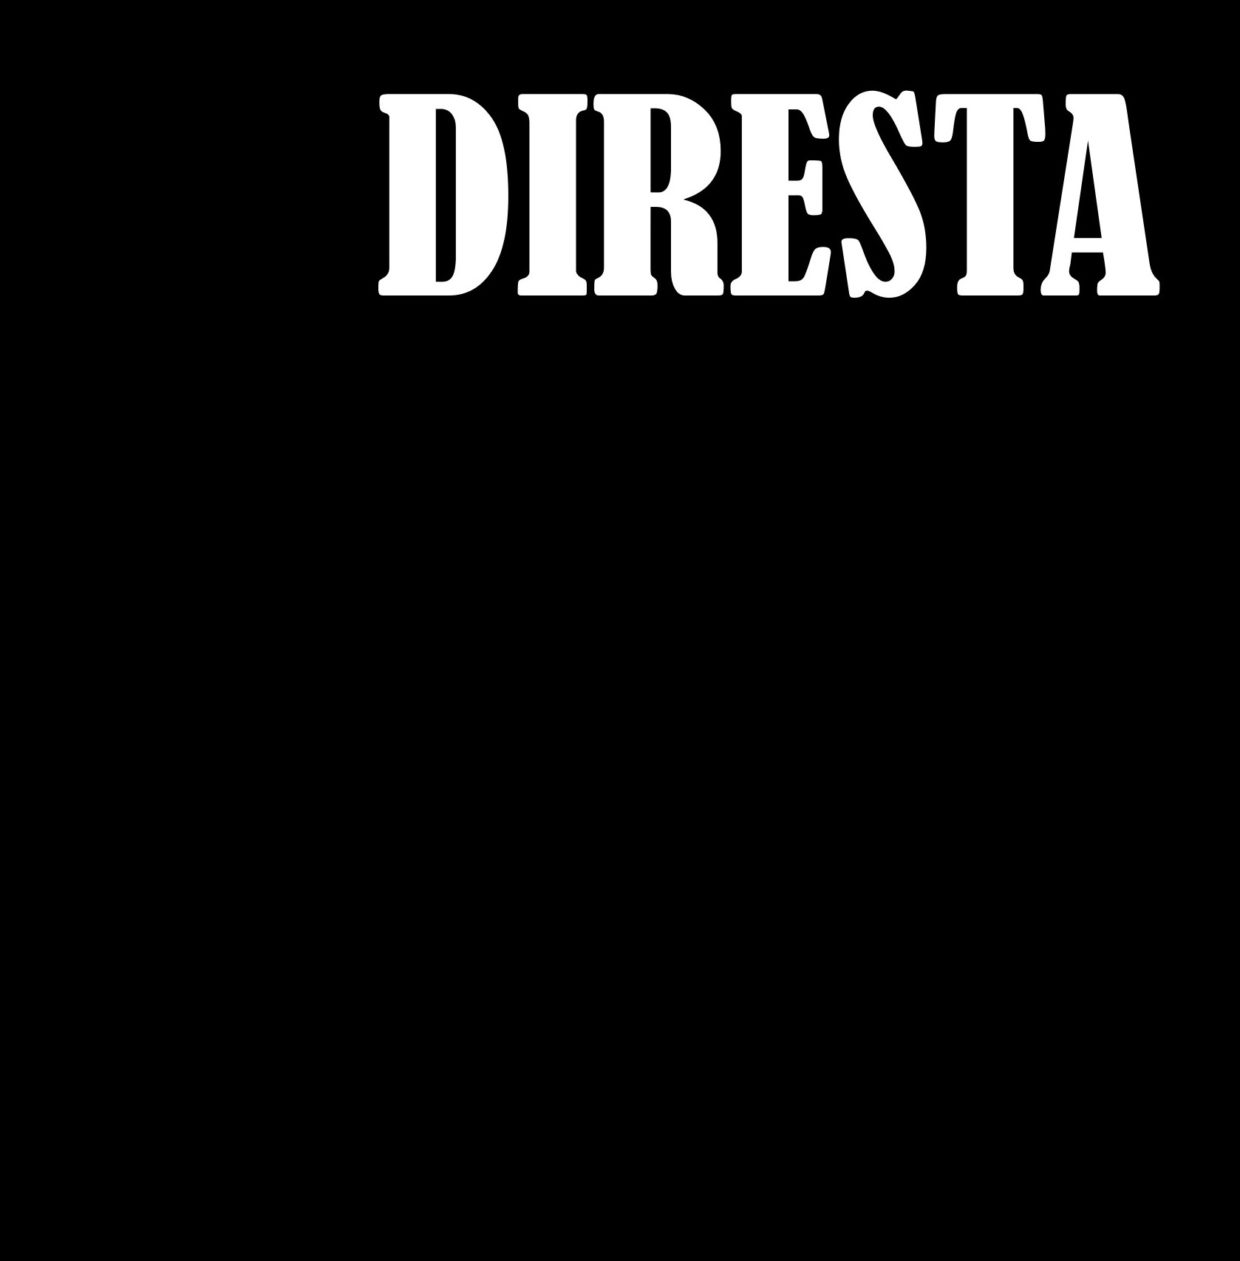 Handmade Diresta image for post feature image.